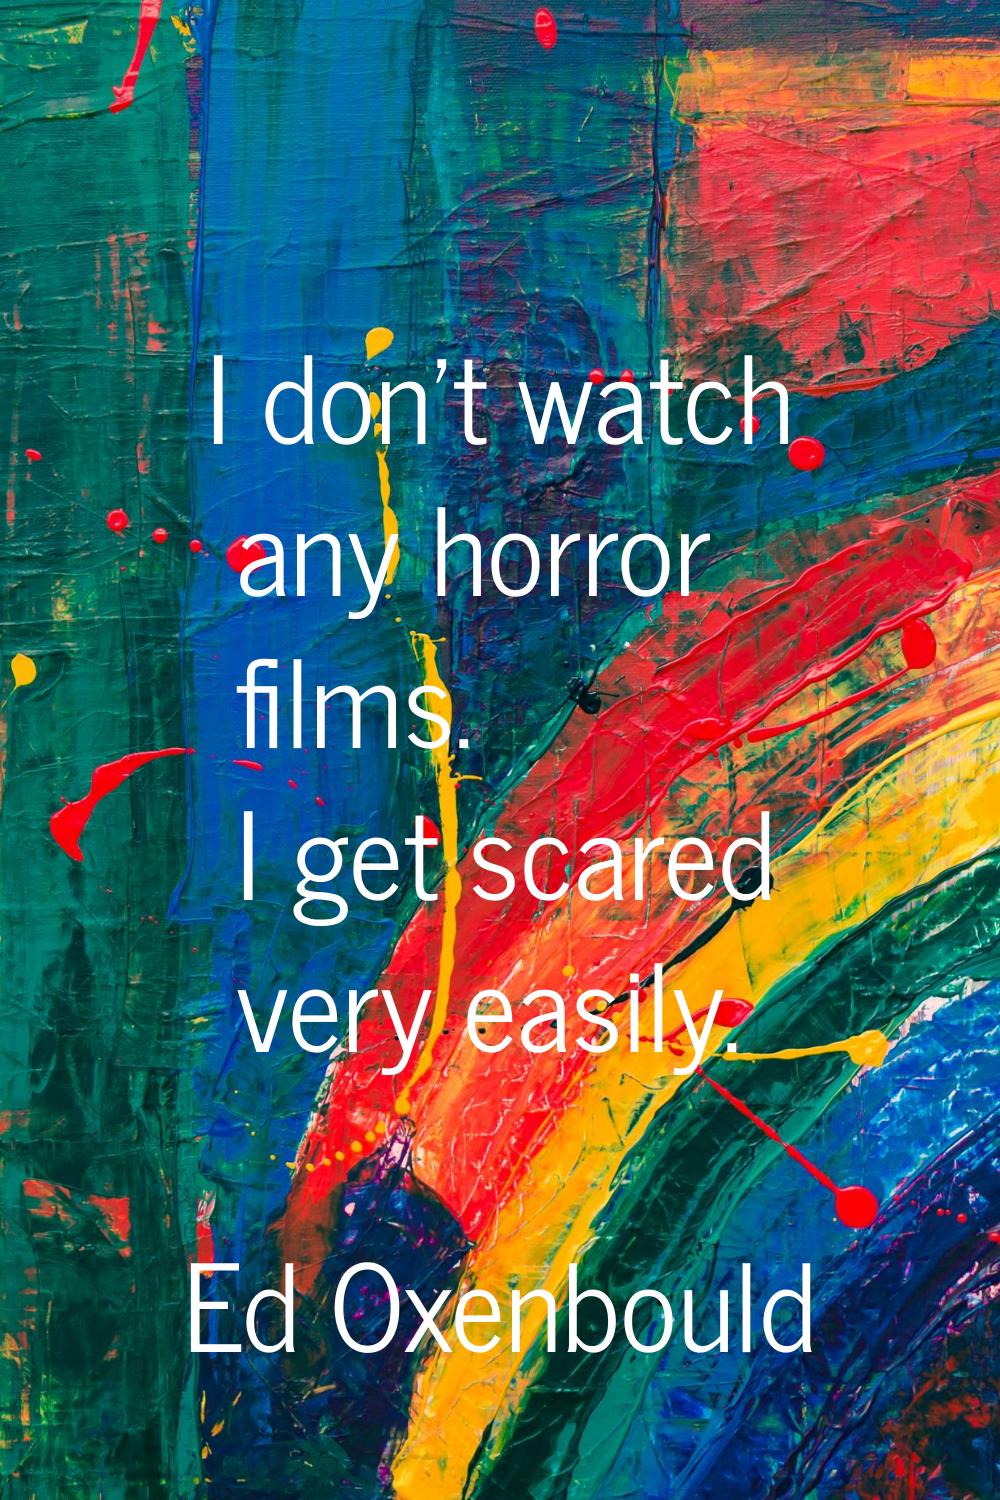 I don't watch any horror films. I get scared very easily.